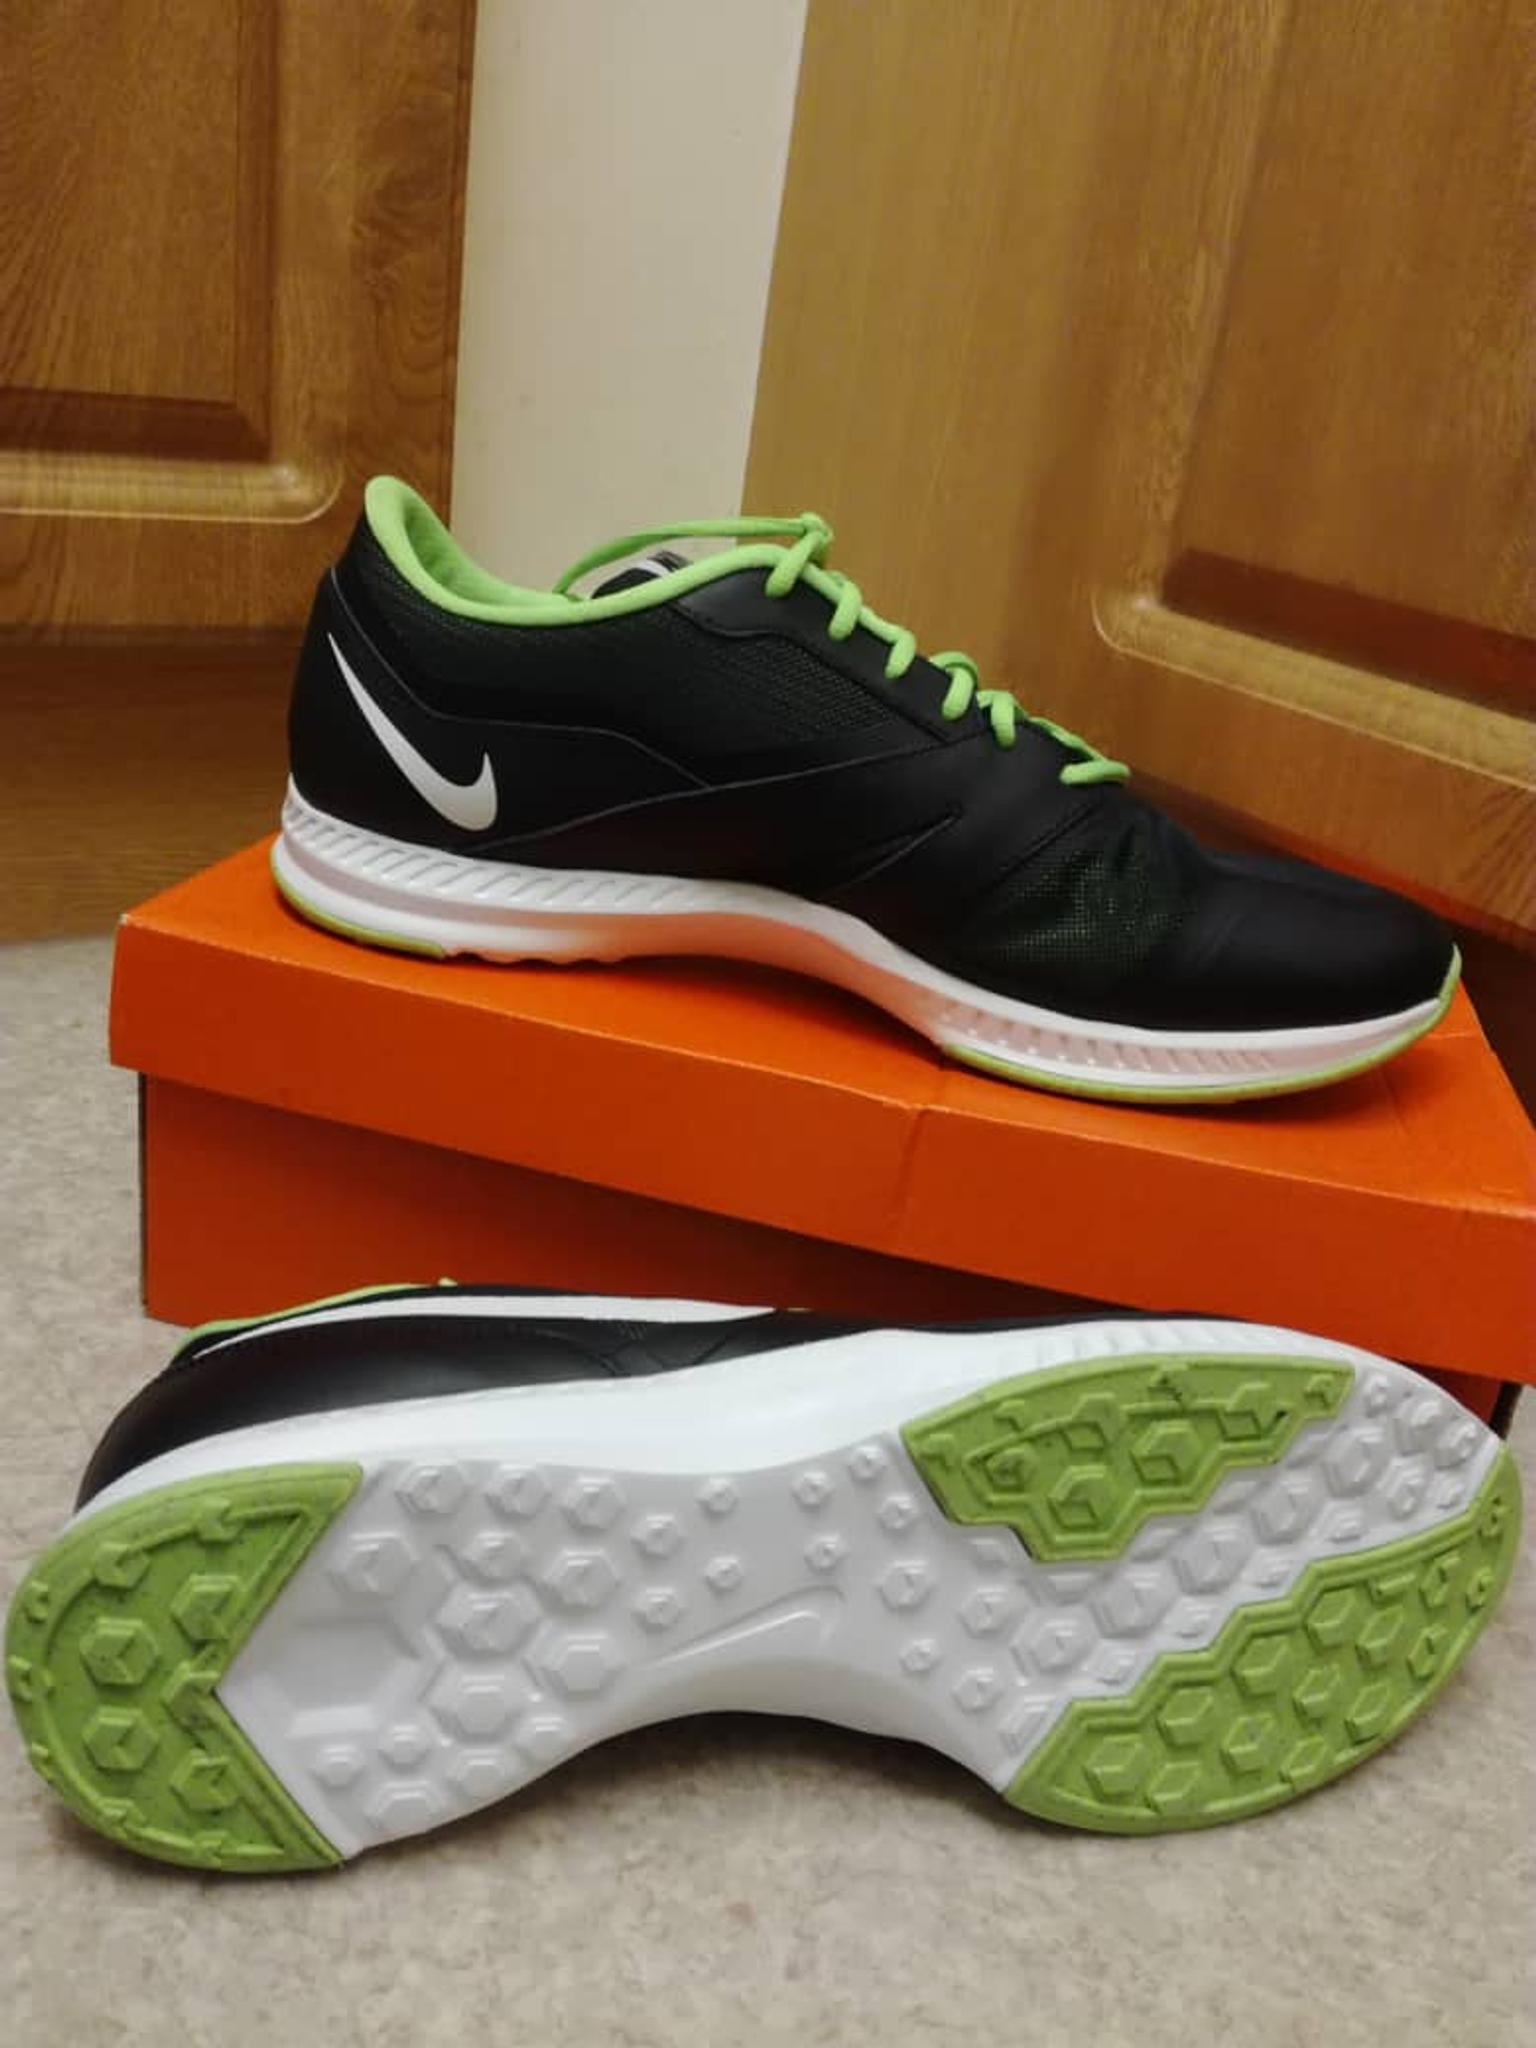 size 14 nike trainers